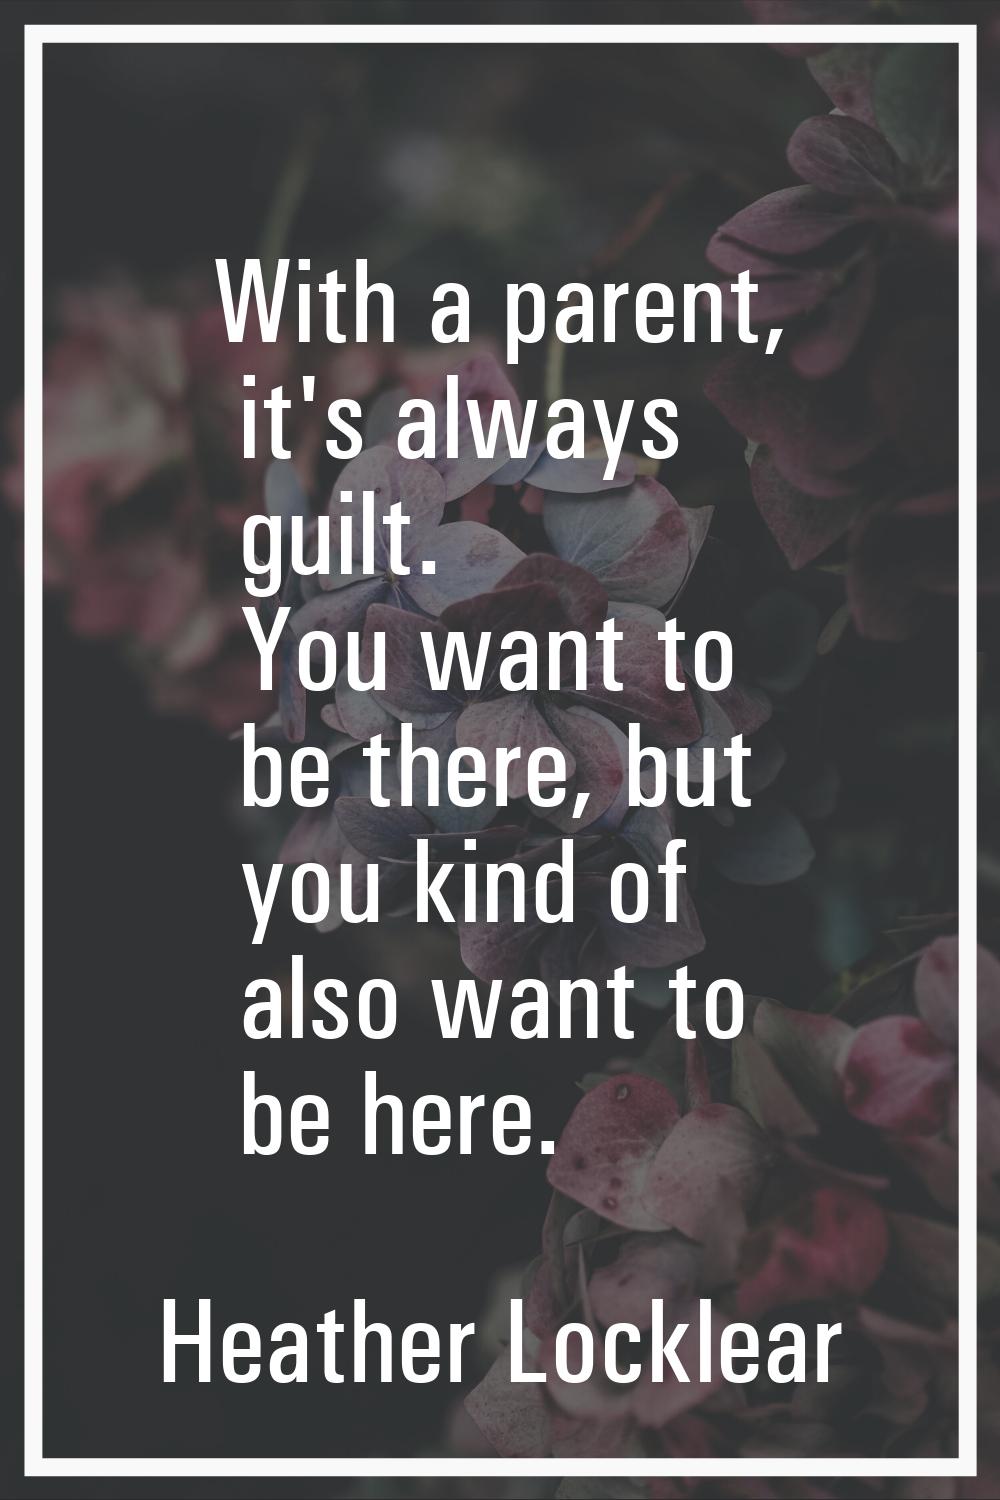 With a parent, it's always guilt. You want to be there, but you kind of also want to be here.